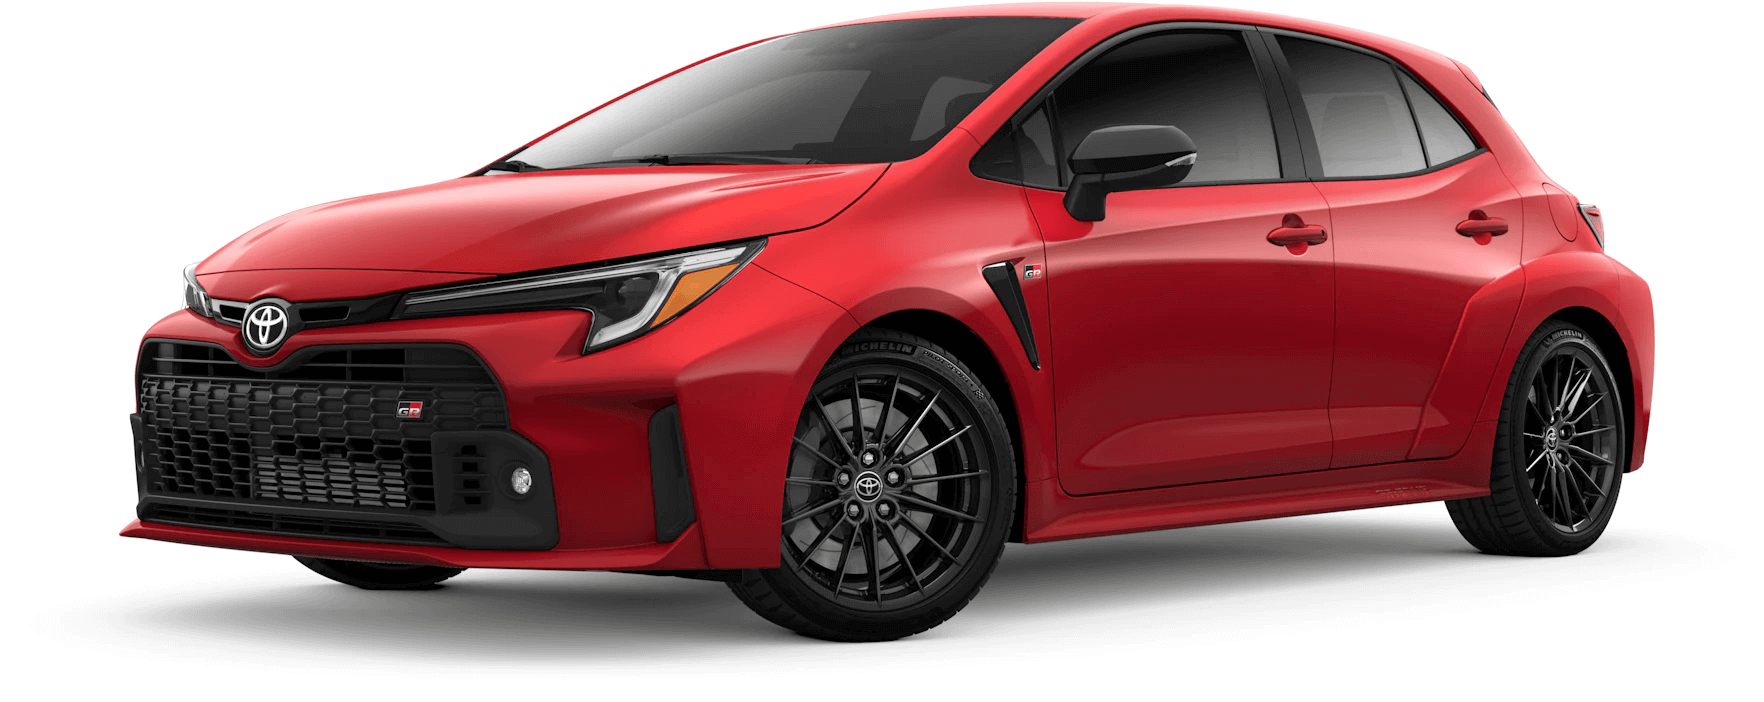 Toyota to Build Exactly 6,600 GR Corollas for 2023